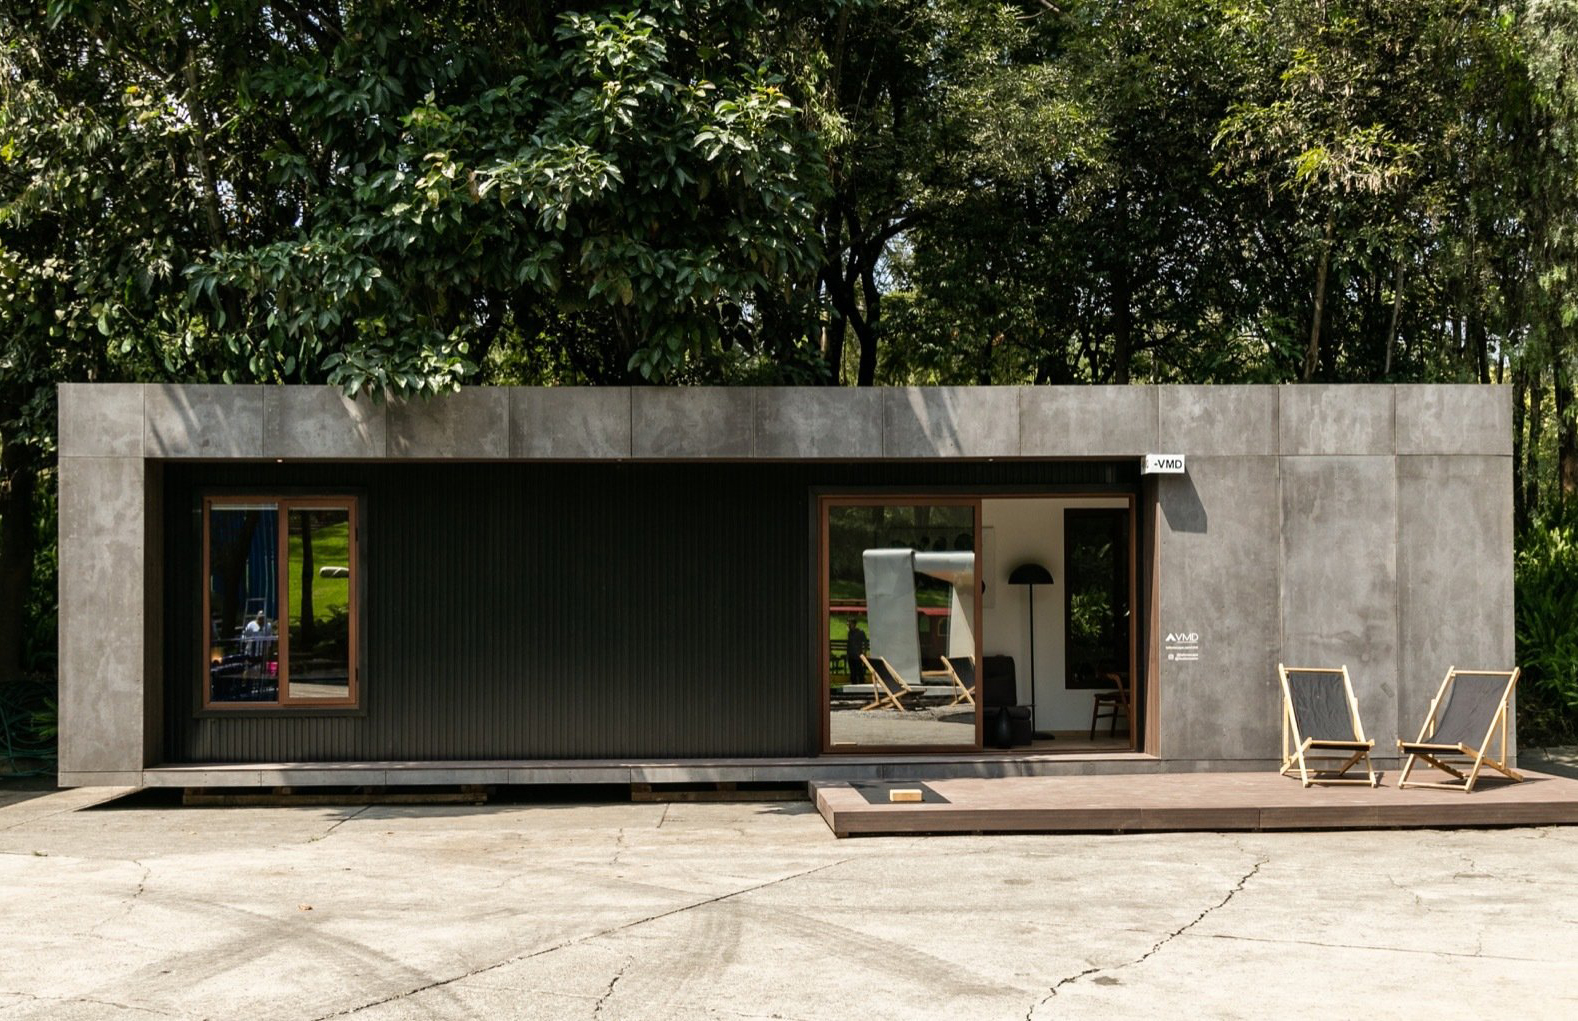 House clad in concrete and metal panels.